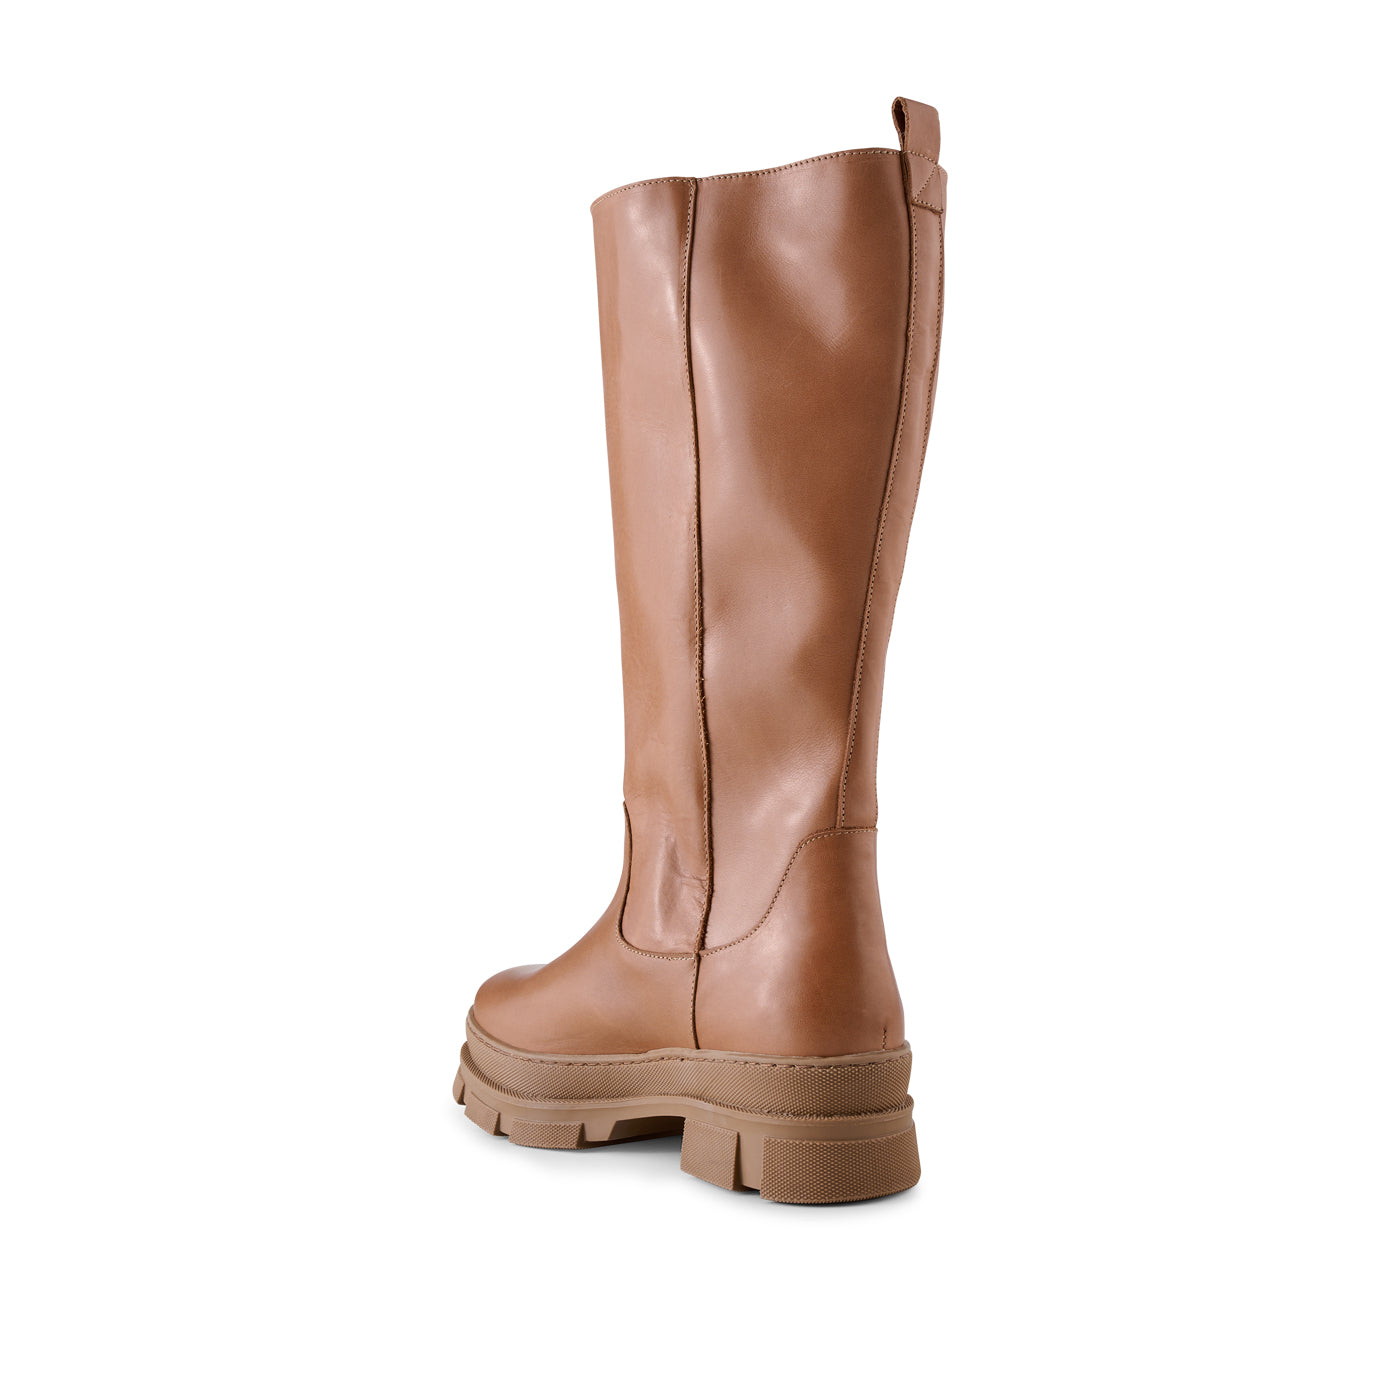 SHOE THE BEAR WOMENS Olga boot leather Boots 052 Tan